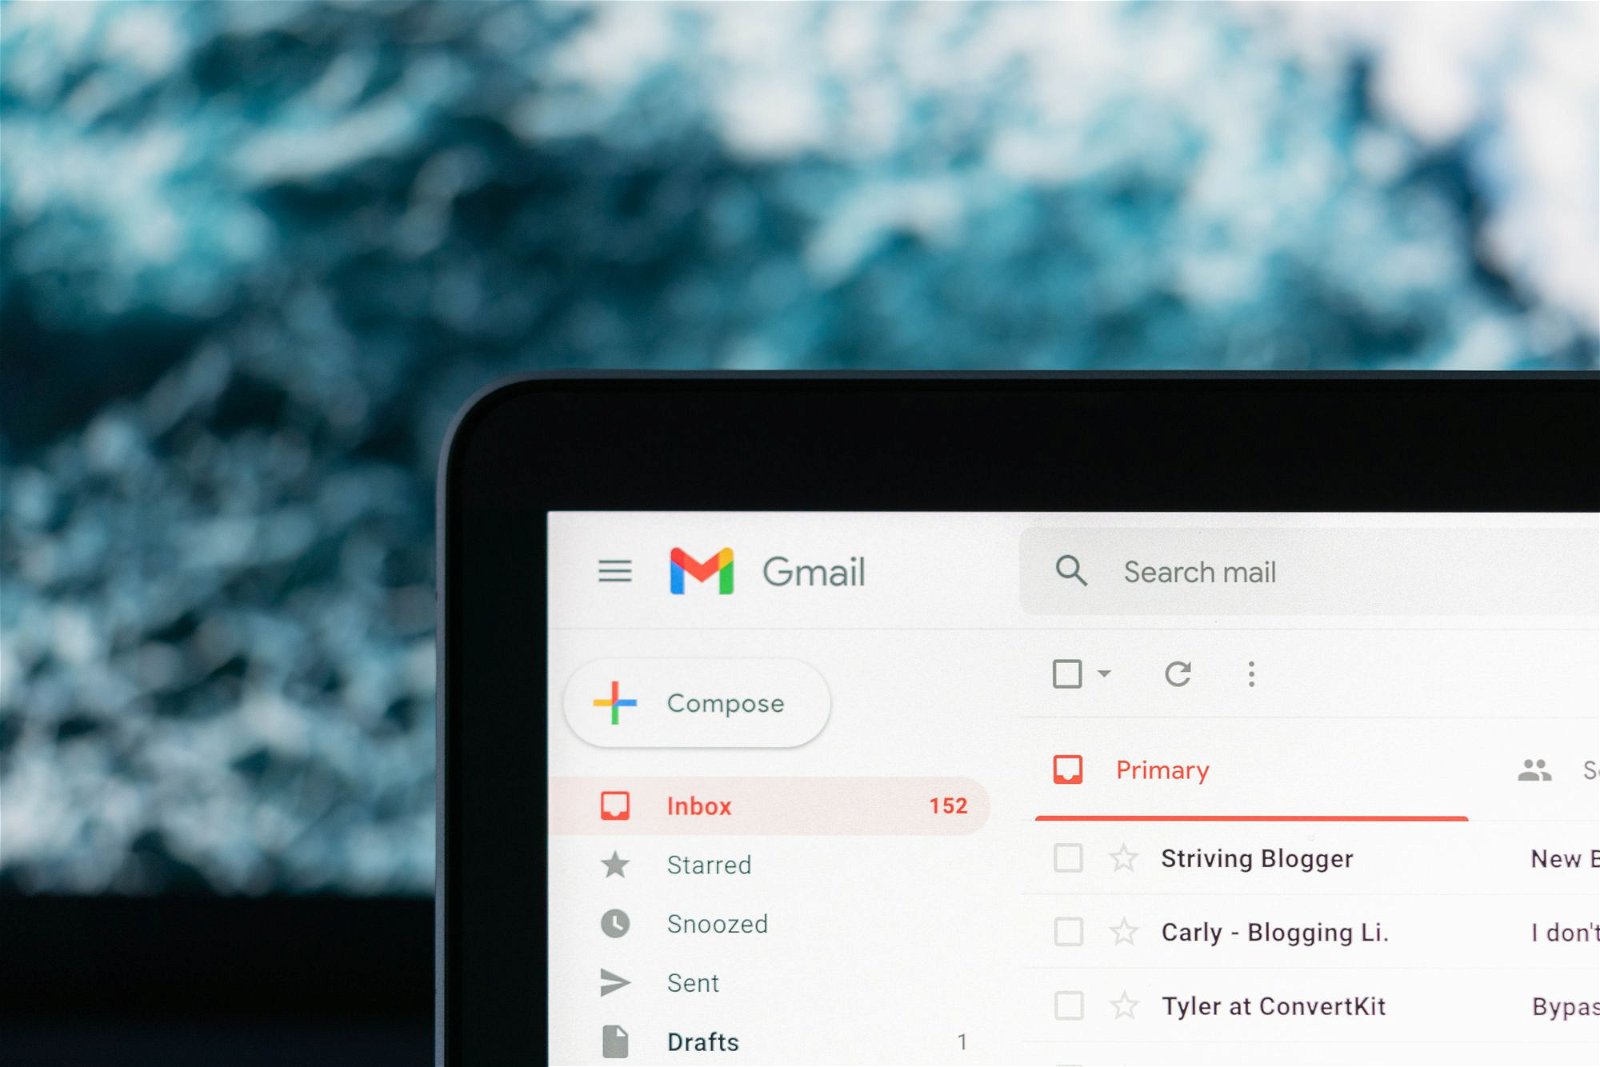 Step-by-step guide on how to block emails on Gmail